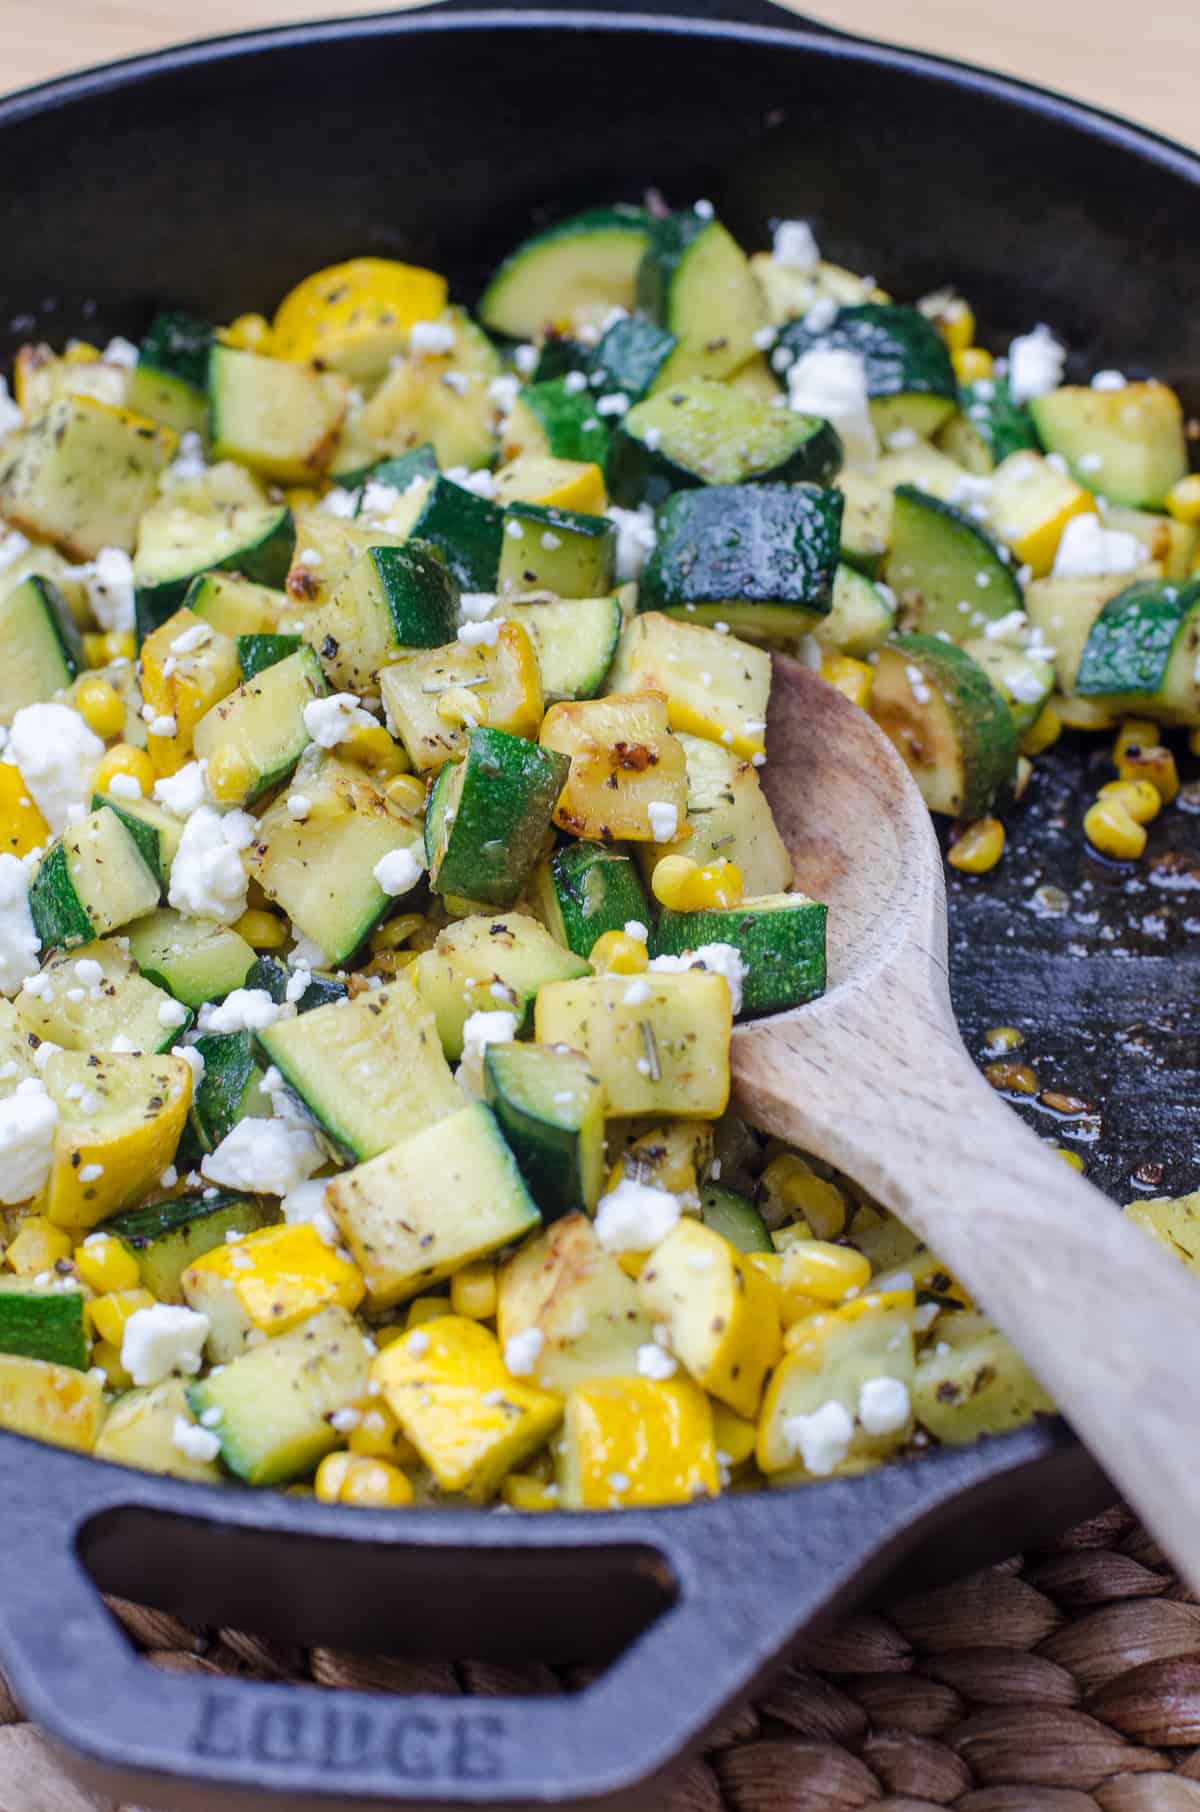 A close up of a wooden spoon scooping zucchini and corn from a skillet.